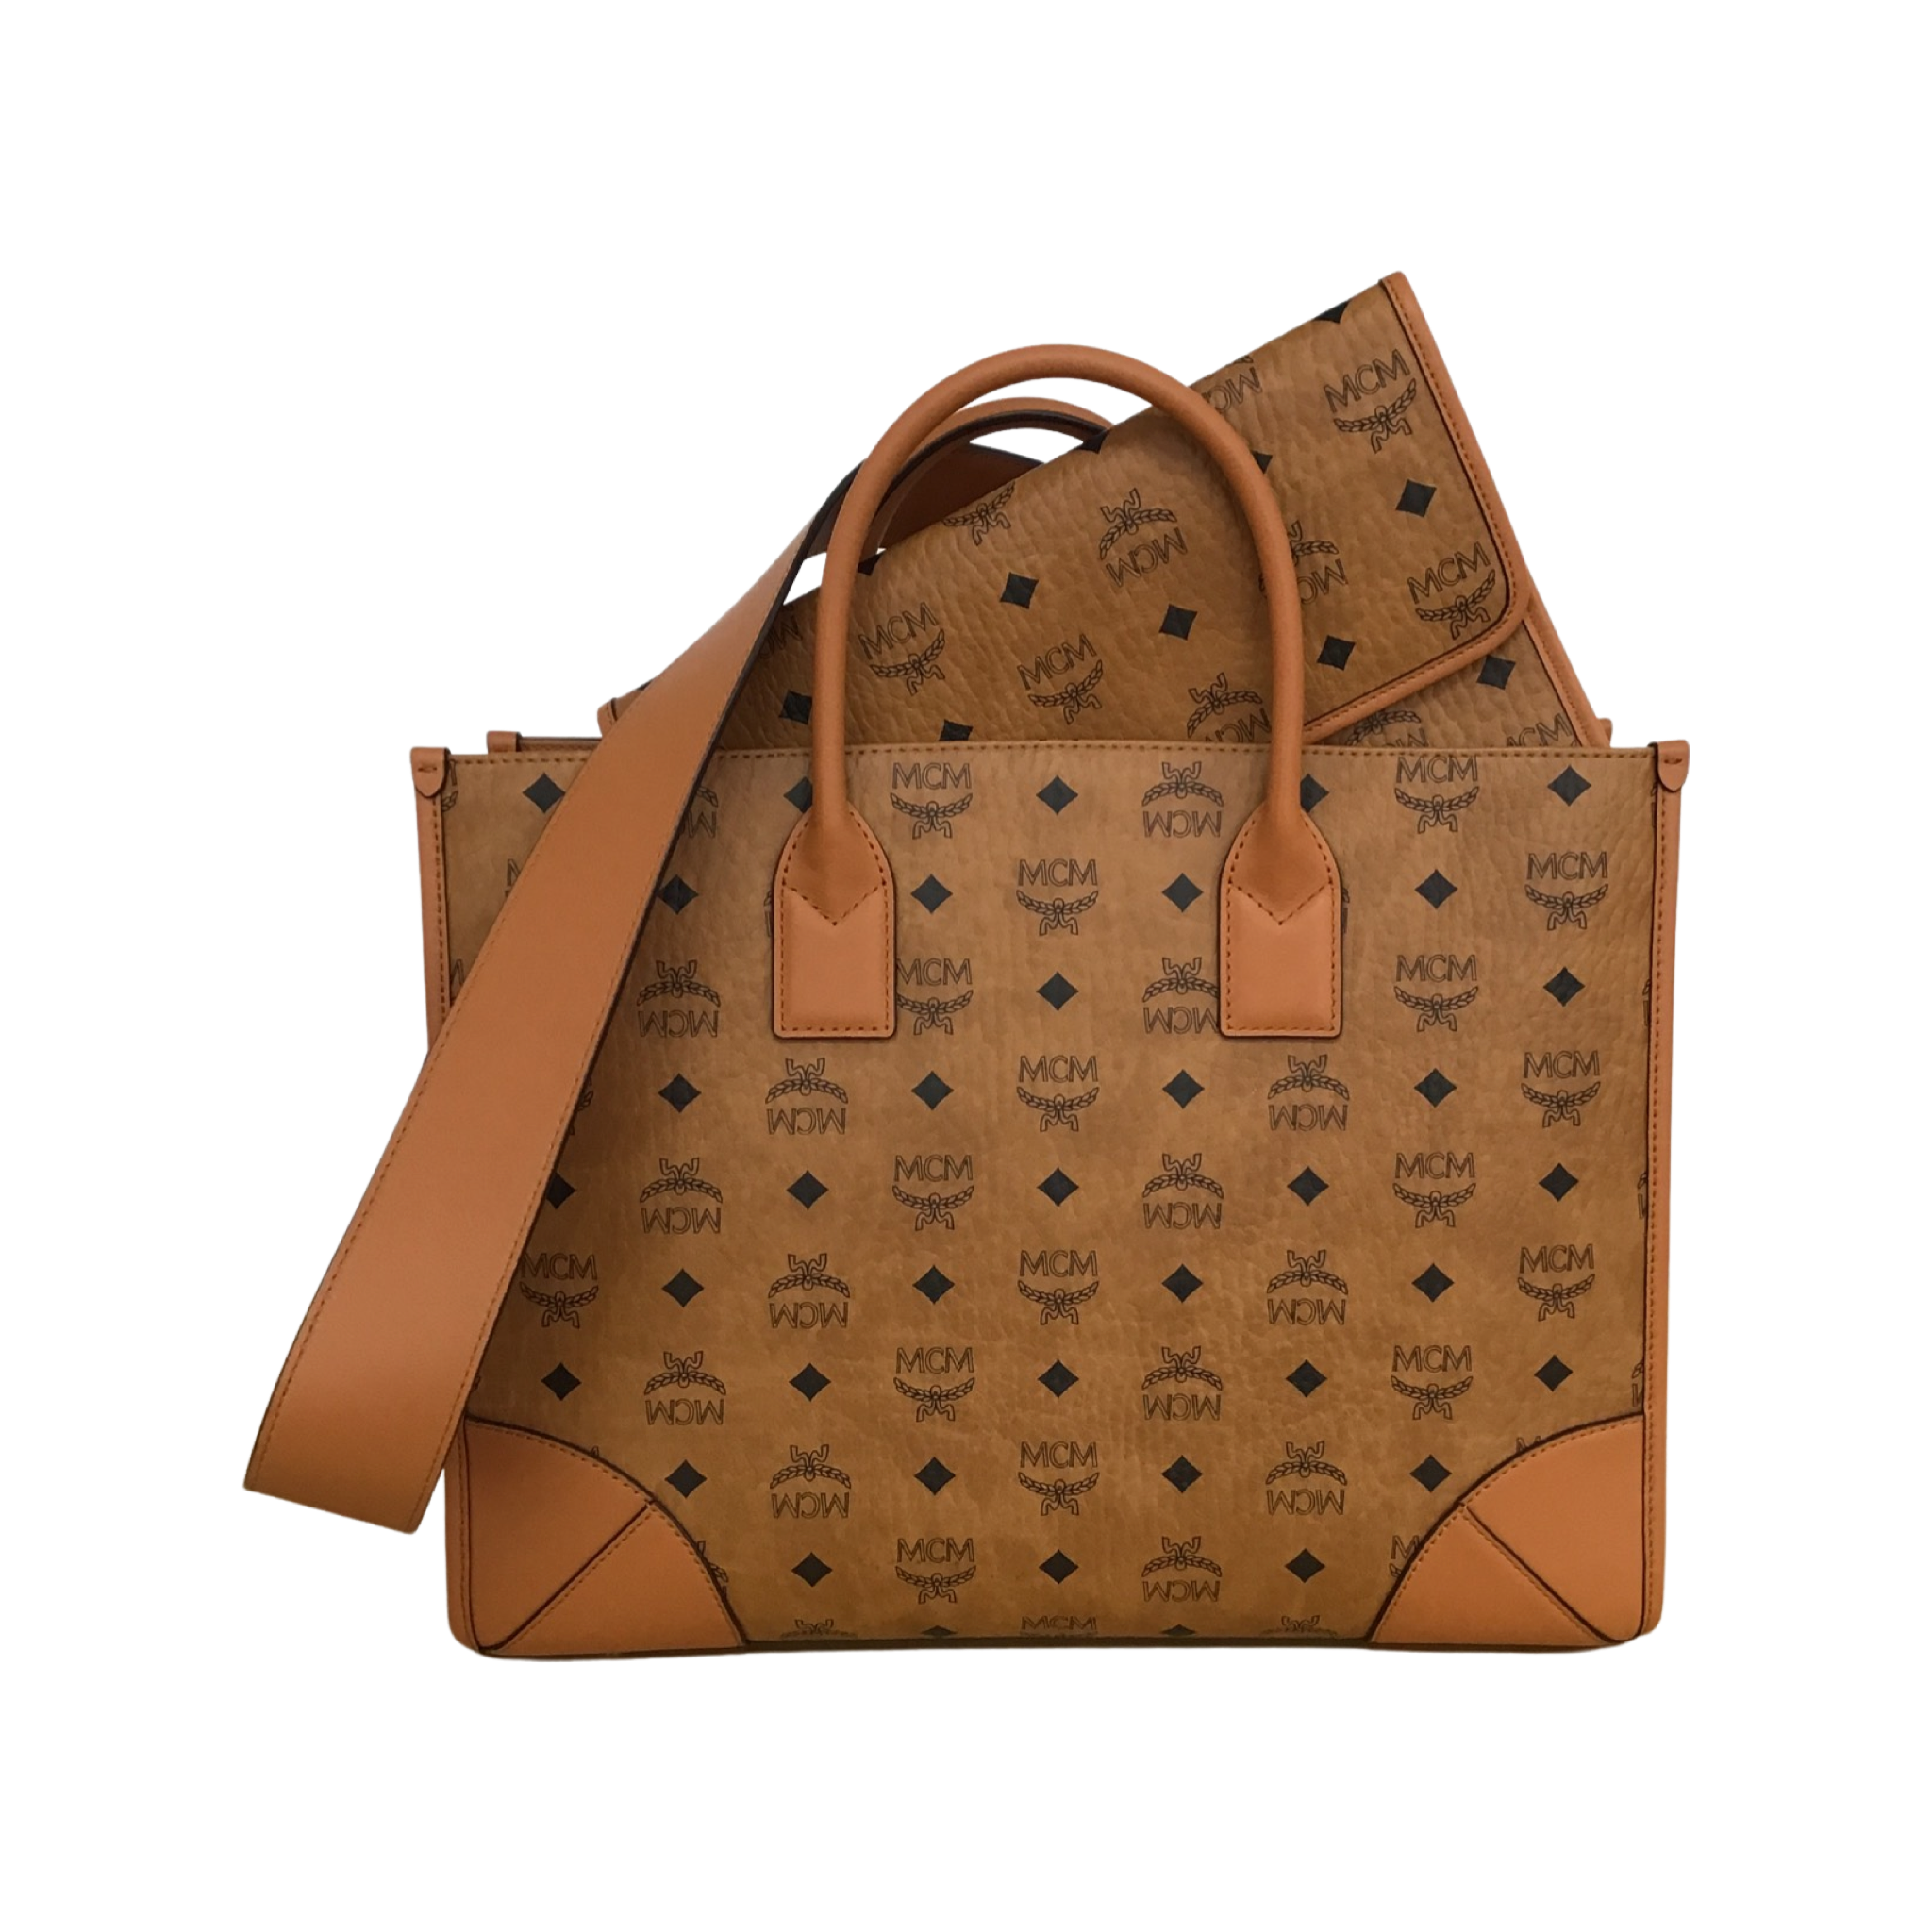 Mcm Large Munchen Leather Tote Bag